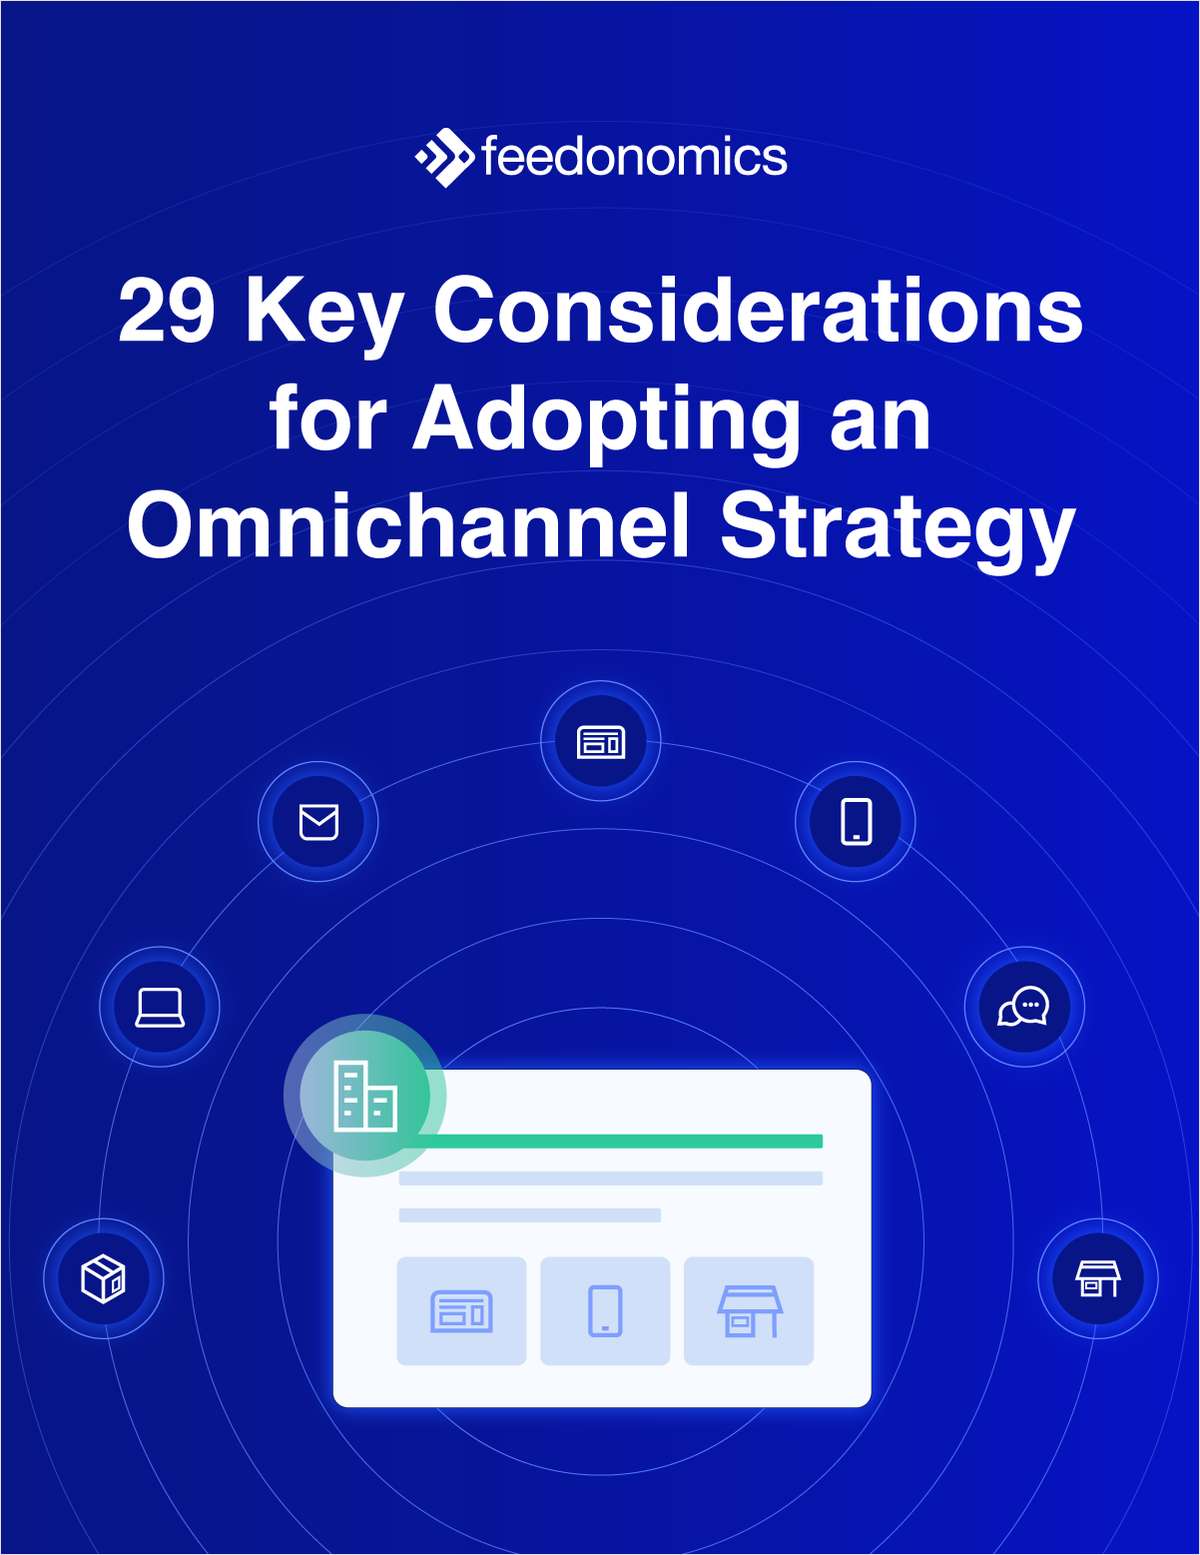 29 Key Considerations for Adopting an Omnichannel Strategy